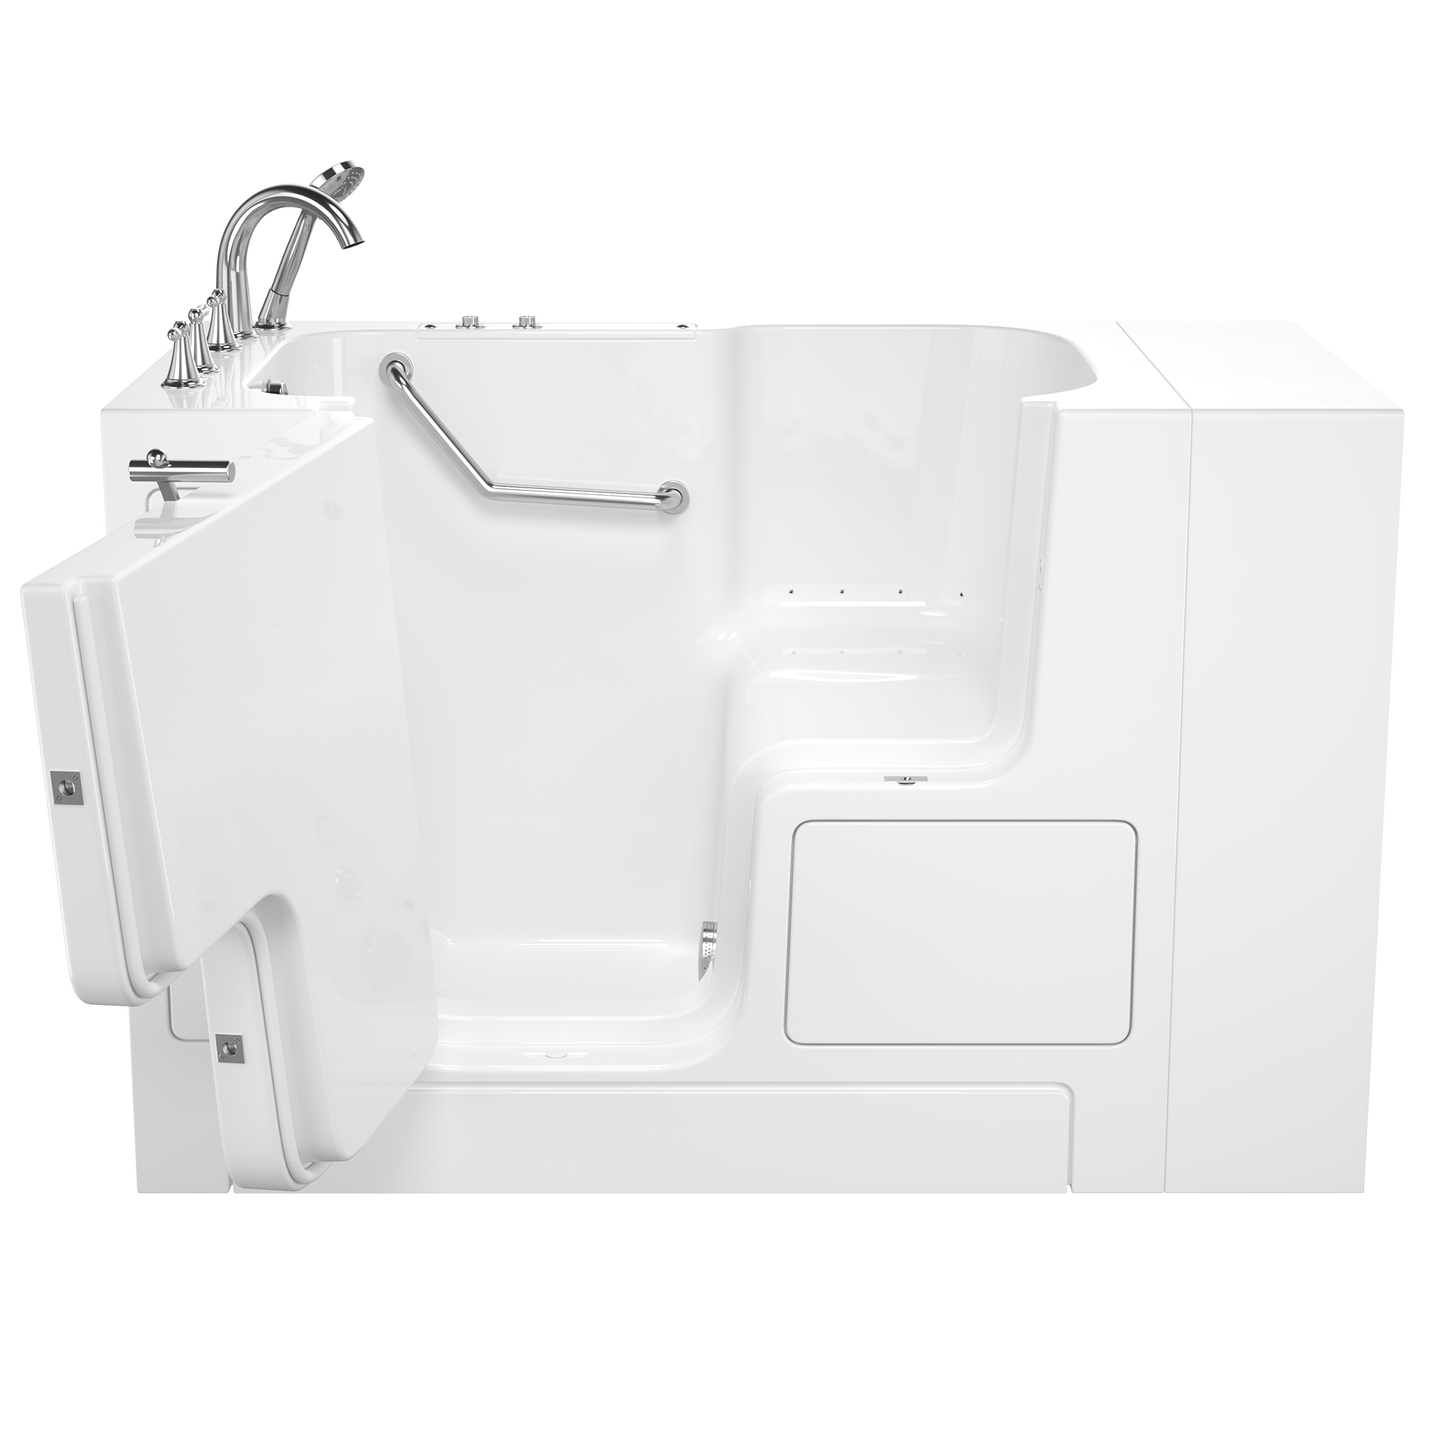 AMERICAN-STANDARD SS9OD5232LA-WH-PC, Gelcoat Premium Series 32 in. x 52 in. Outward Opening Door Walk-In Bathtub with Air Spa system in Wib White